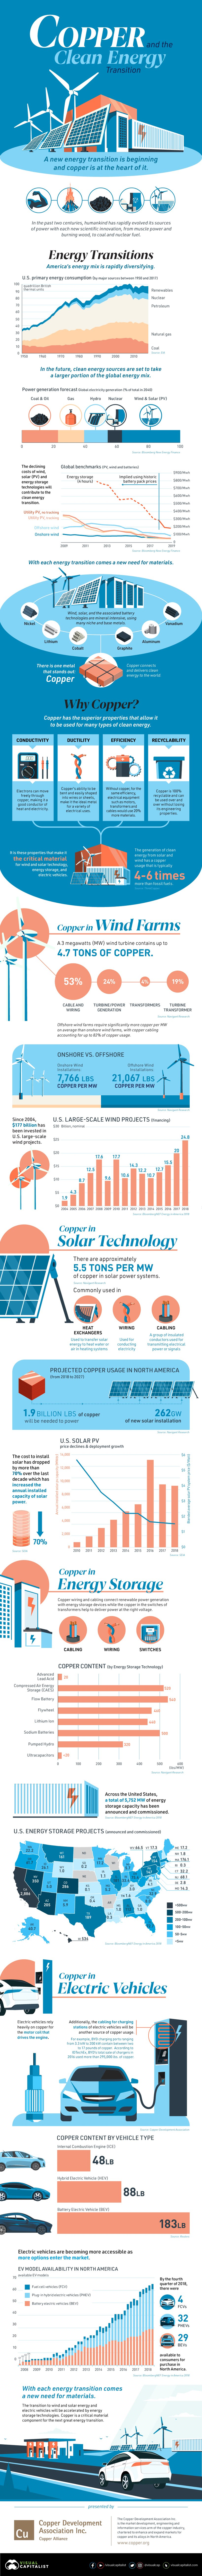 Visualizing Copper’s Role in the Transition to Clean Energy #infographic